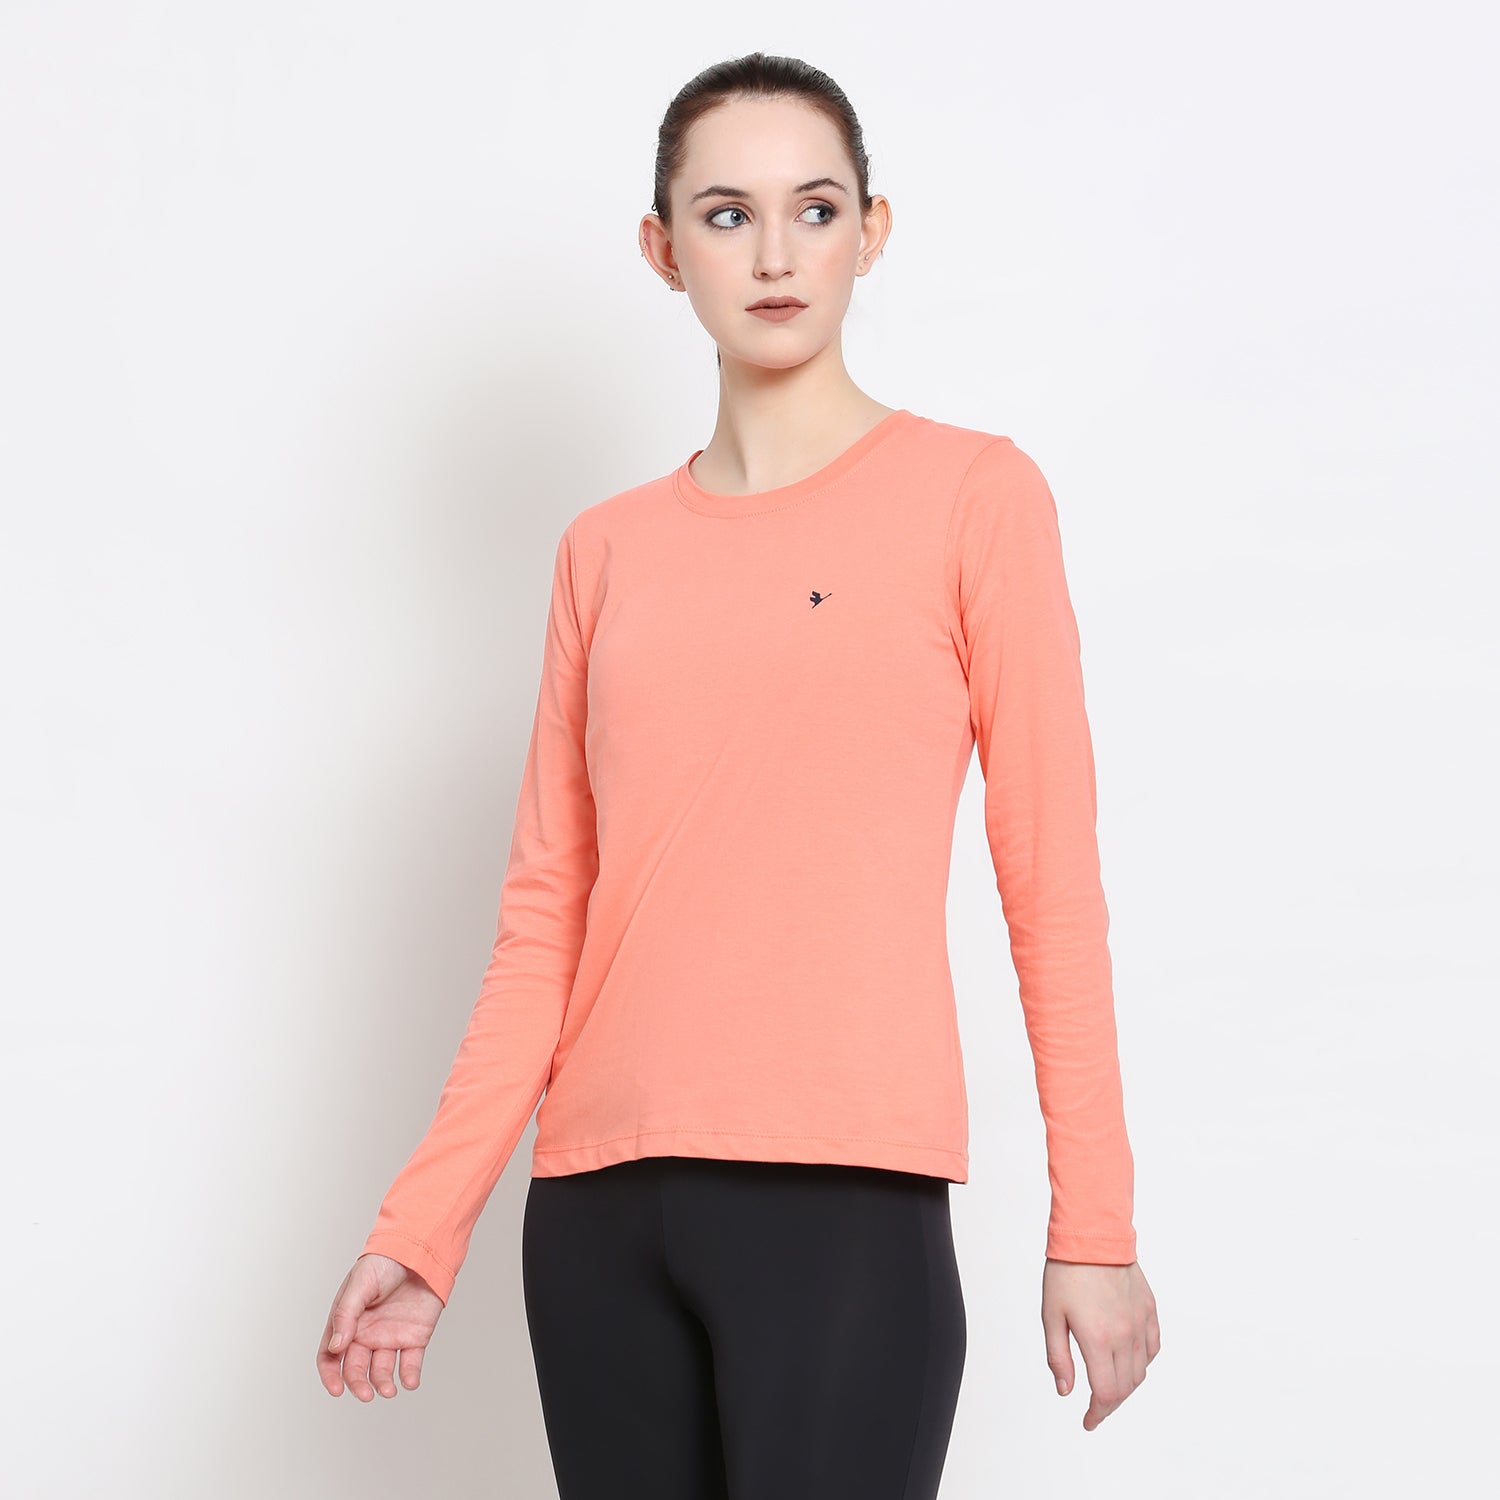 WOMENS PREMIUM COTTON SOLID FULL SLEEVE T-SHIRTS